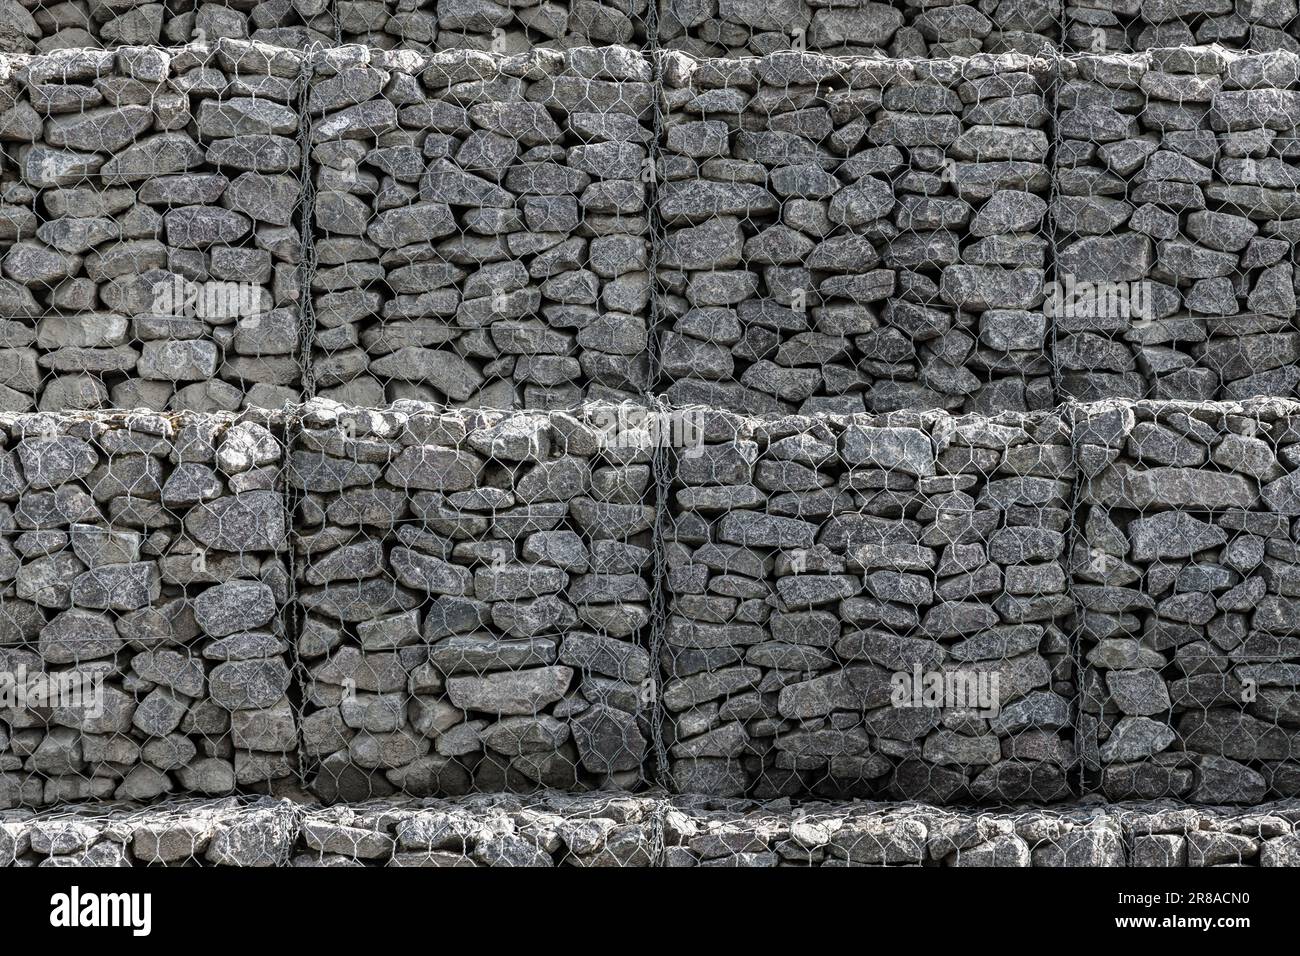 Texture of a gabion wall, steel cages filled with rocks Stock Photo